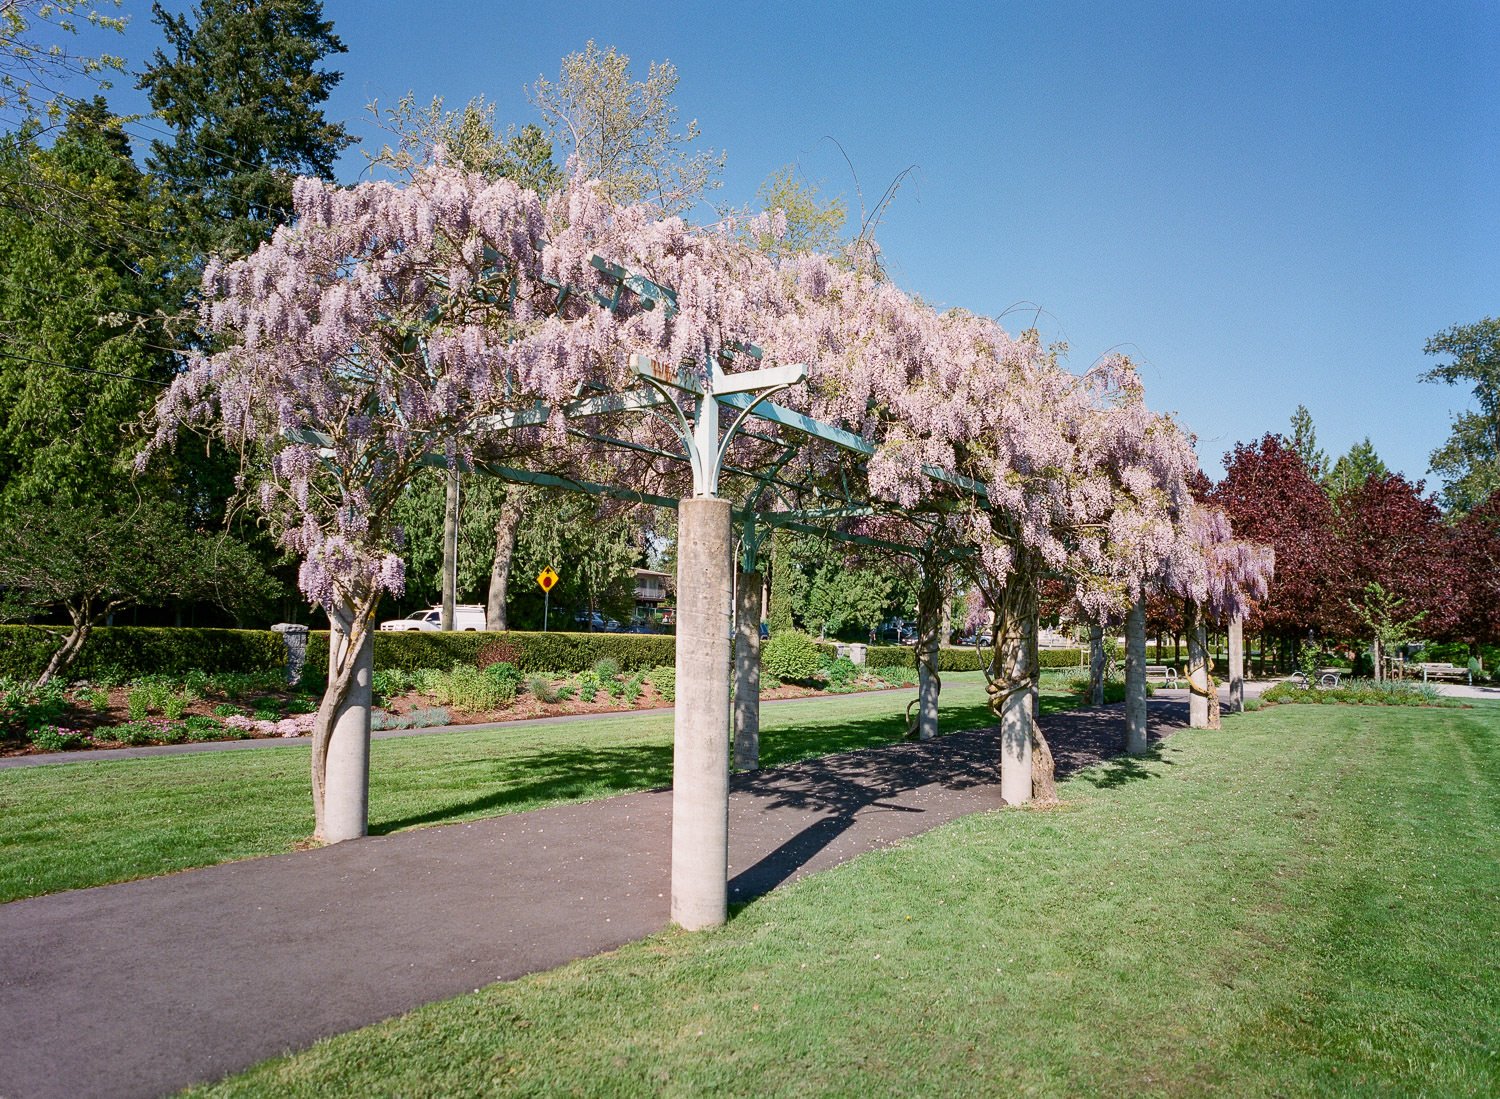 Pergola with flowers blooming